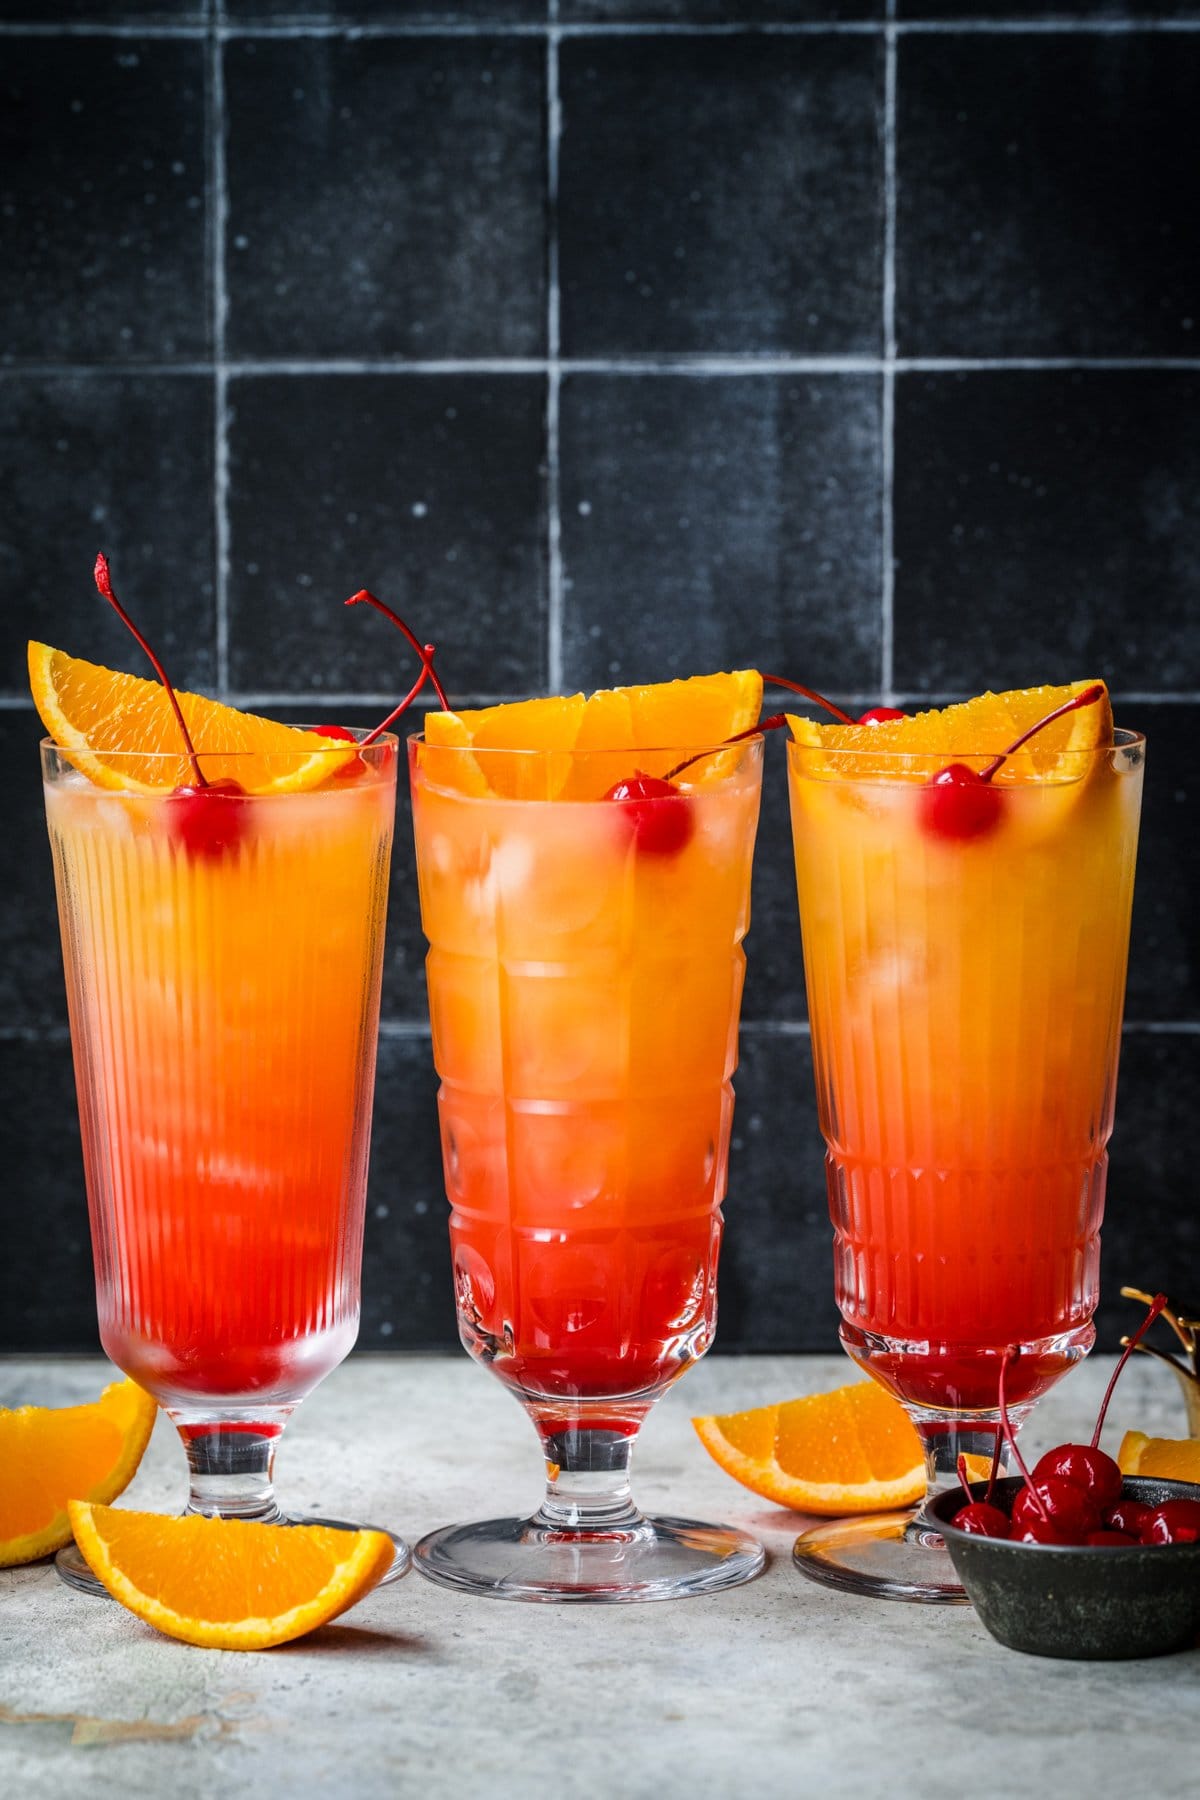 Front view of three tequila sunrise mocktails garnished with orange and cherry.